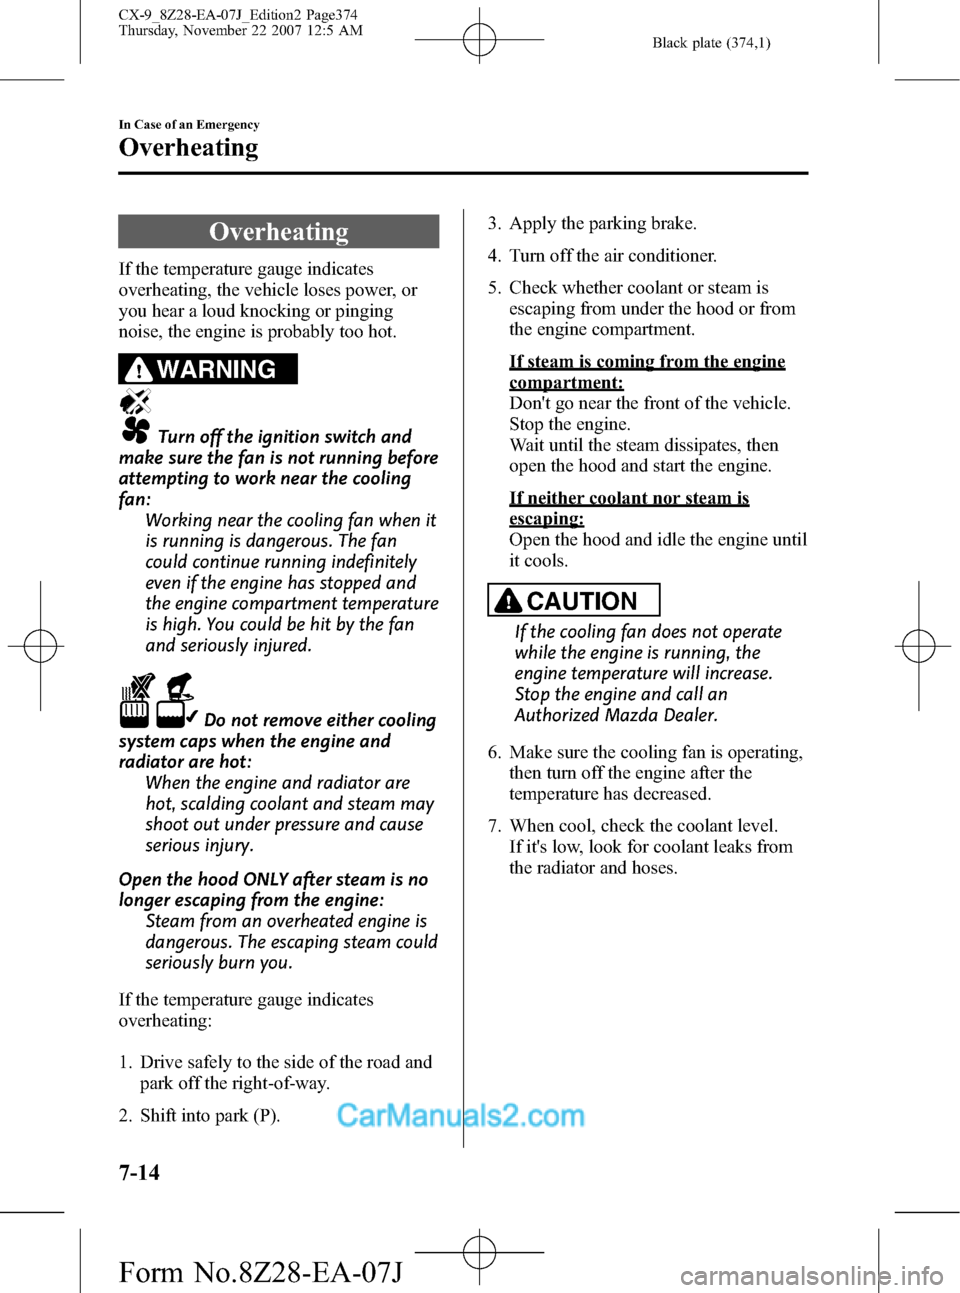 MAZDA MODEL CX-9 2008  Owners Manual (in English) Black plate (374,1)
Overheating
If the temperature gauge indicates
overheating, the vehicle loses power, or
you hear a loud knocking or pinging
noise, the engine is probably too hot.
WARNING
Turn off 